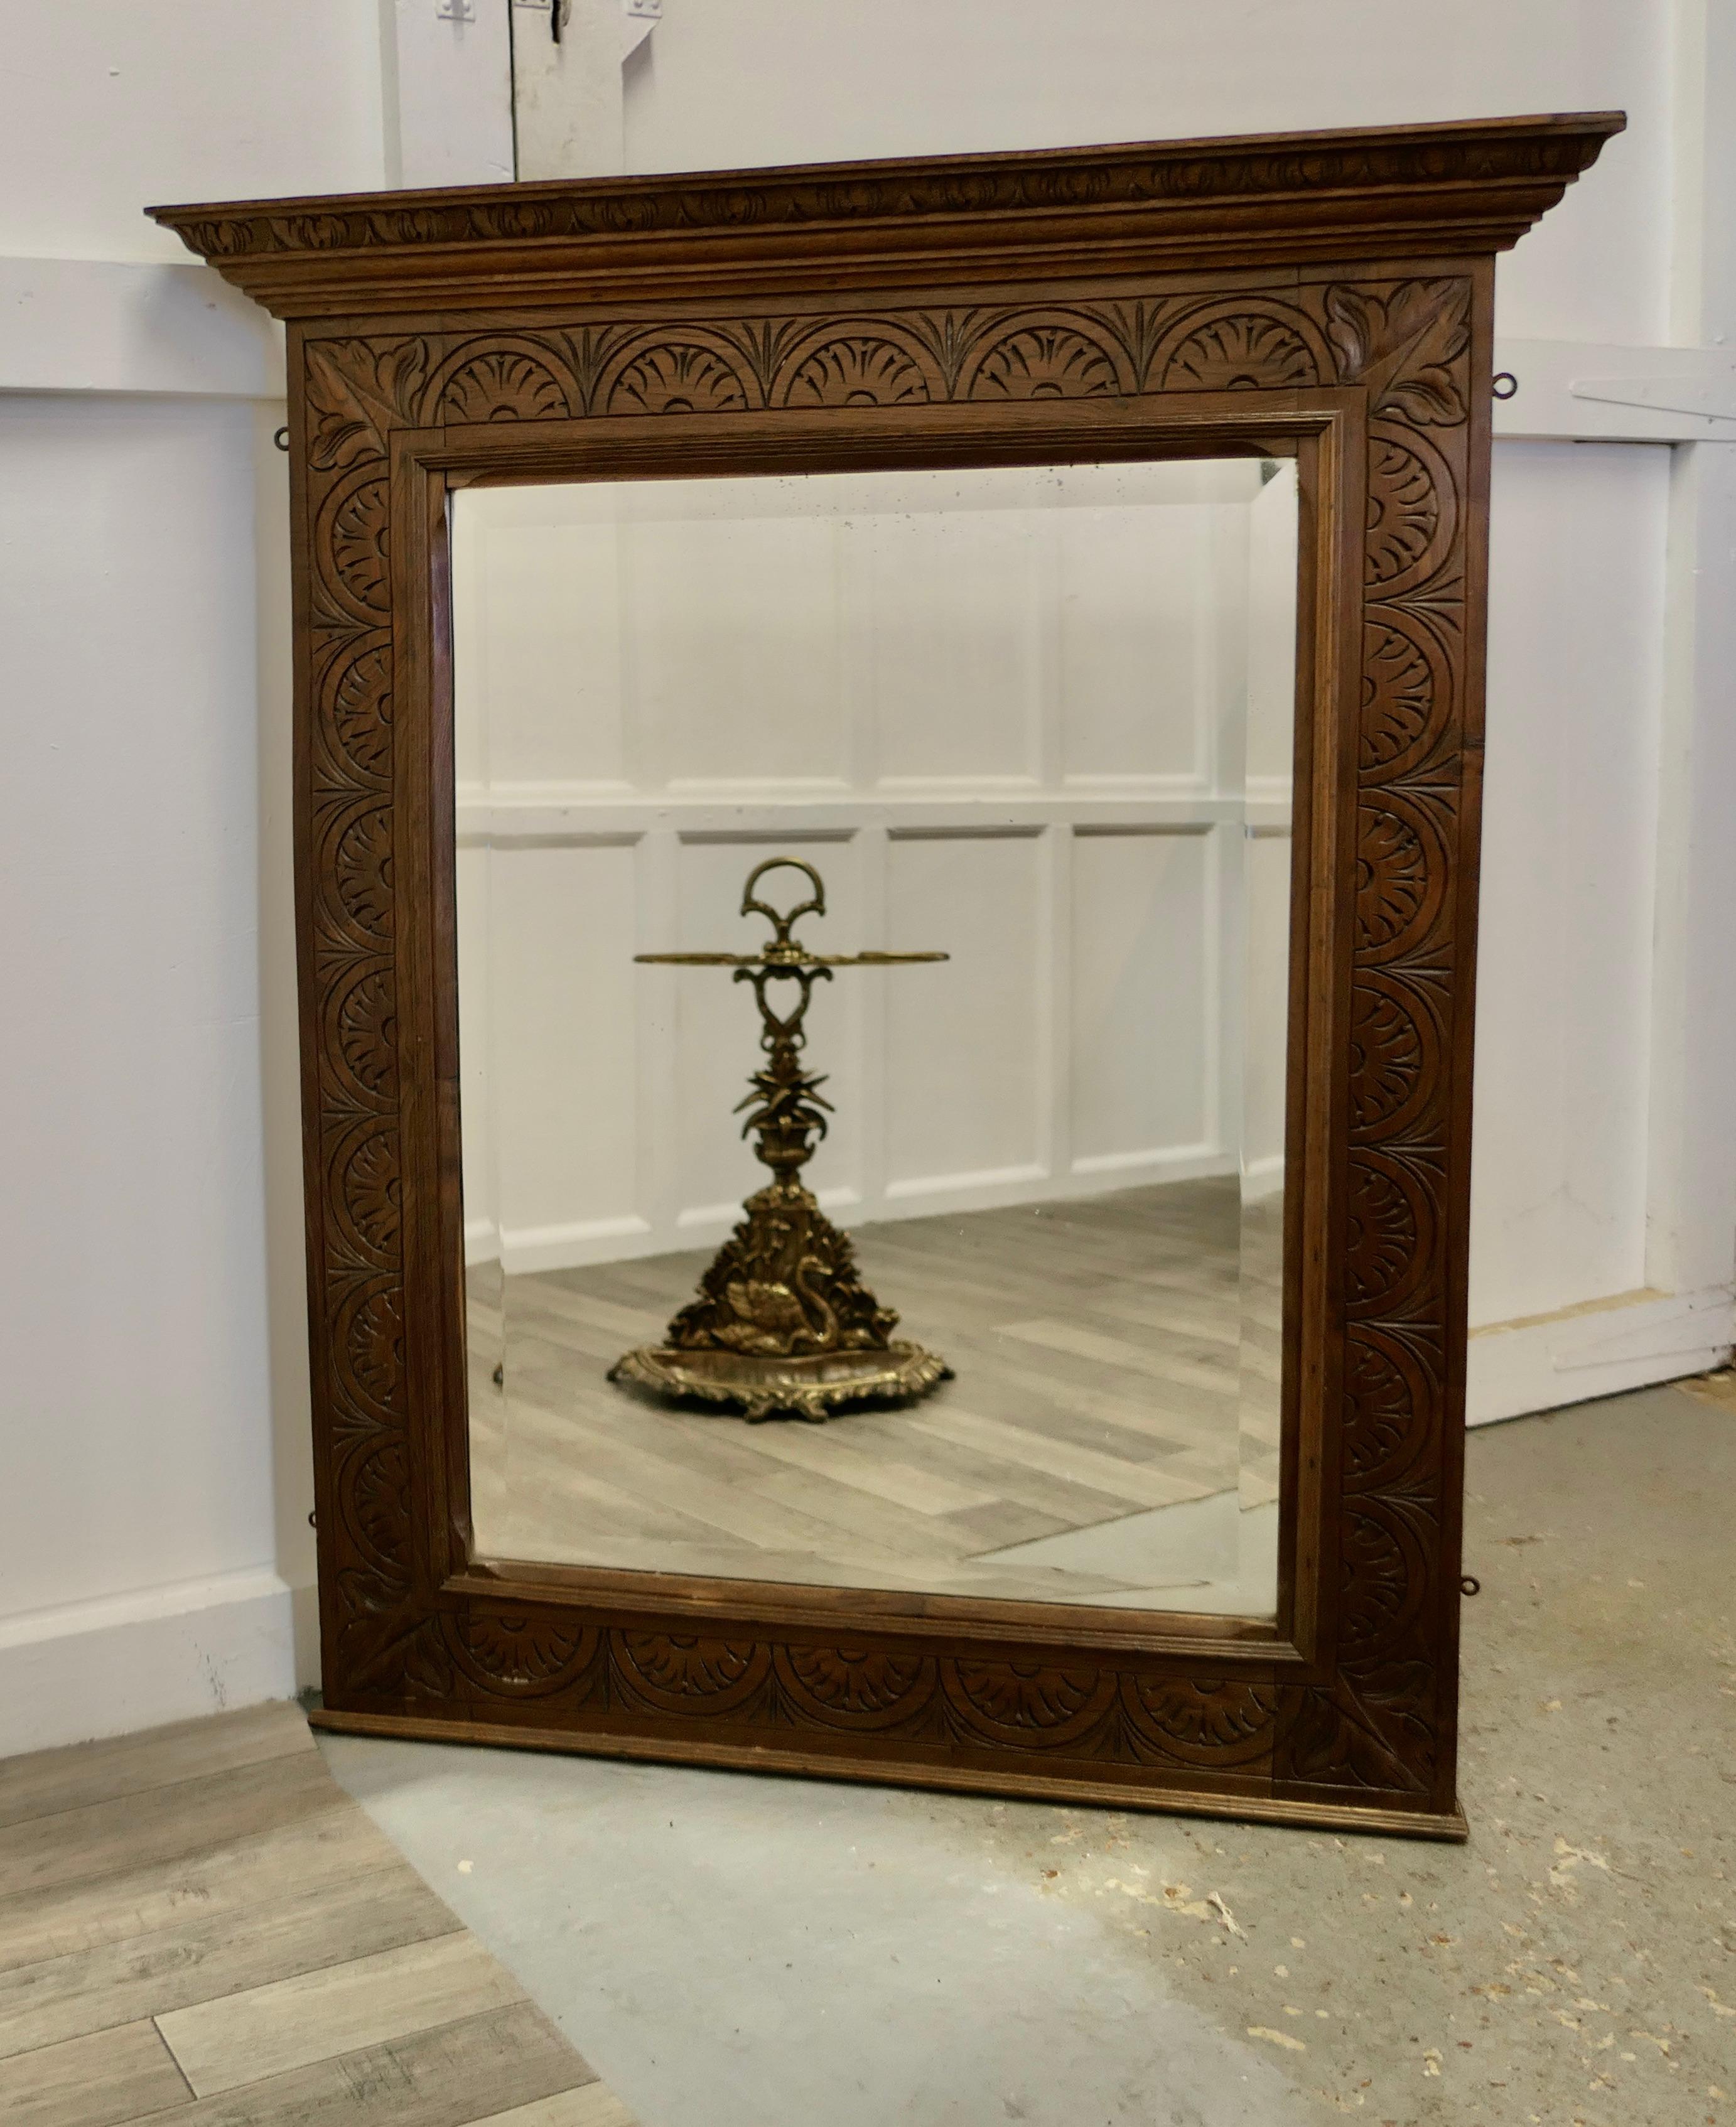 A Very Large Carved Oak Overmantel or Wall Mirror

This is a Large French Mirror the Frame is 5” wide and has a carved decoration matching the carved cornice at the top. The bevelled looking Glass is the original 
The Mirror Frame is 46” high and